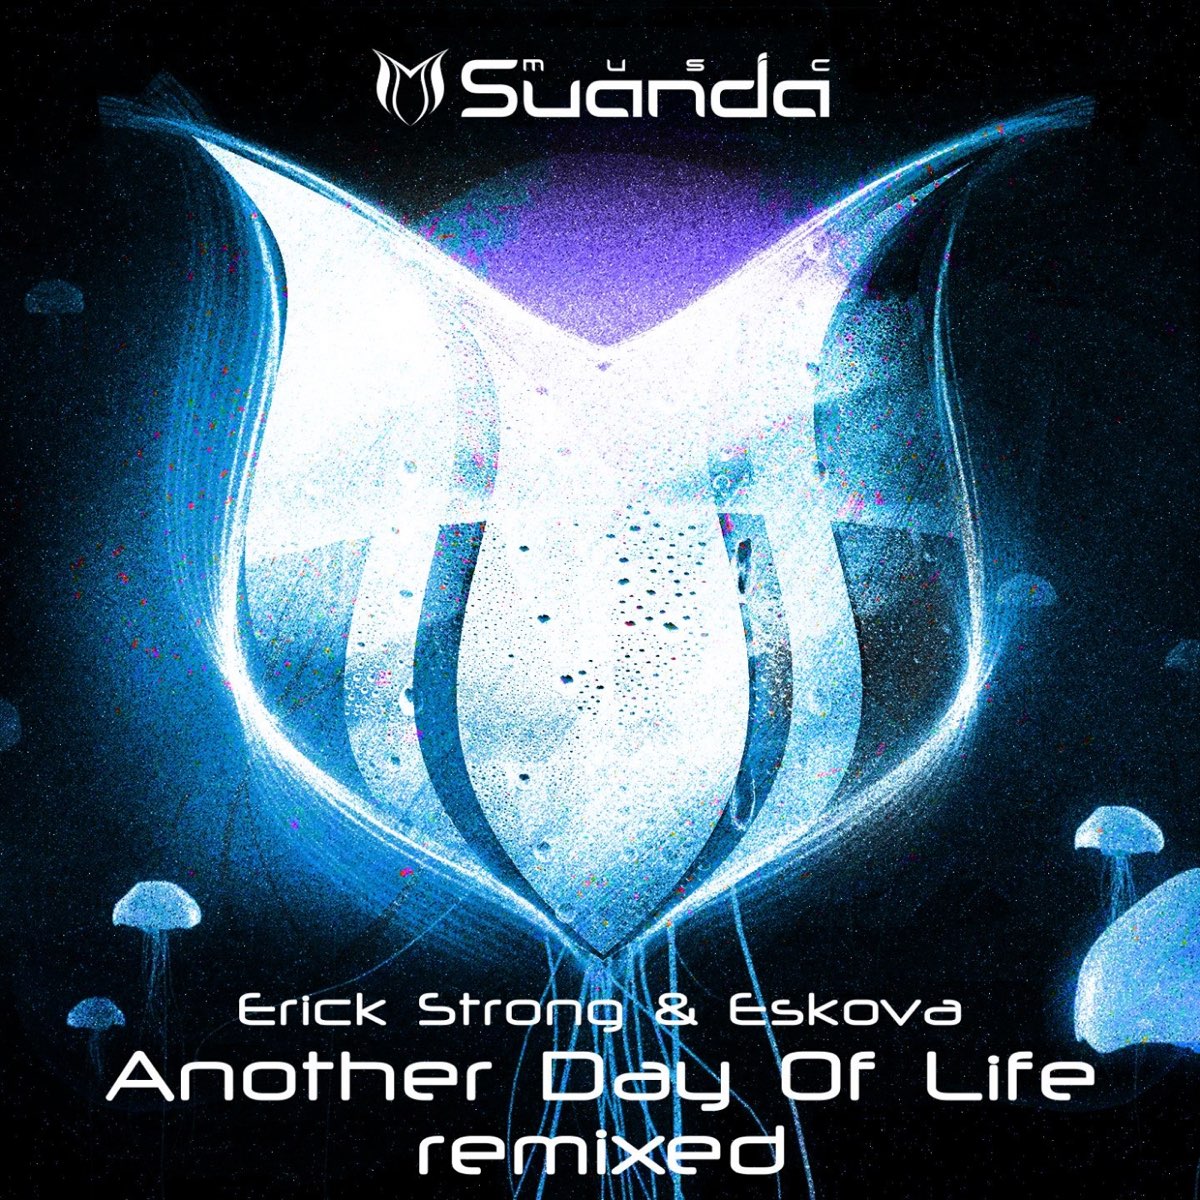 Love life remake. Suanda Music лейбл. Erick strong. Suanda 374. Life another Day.